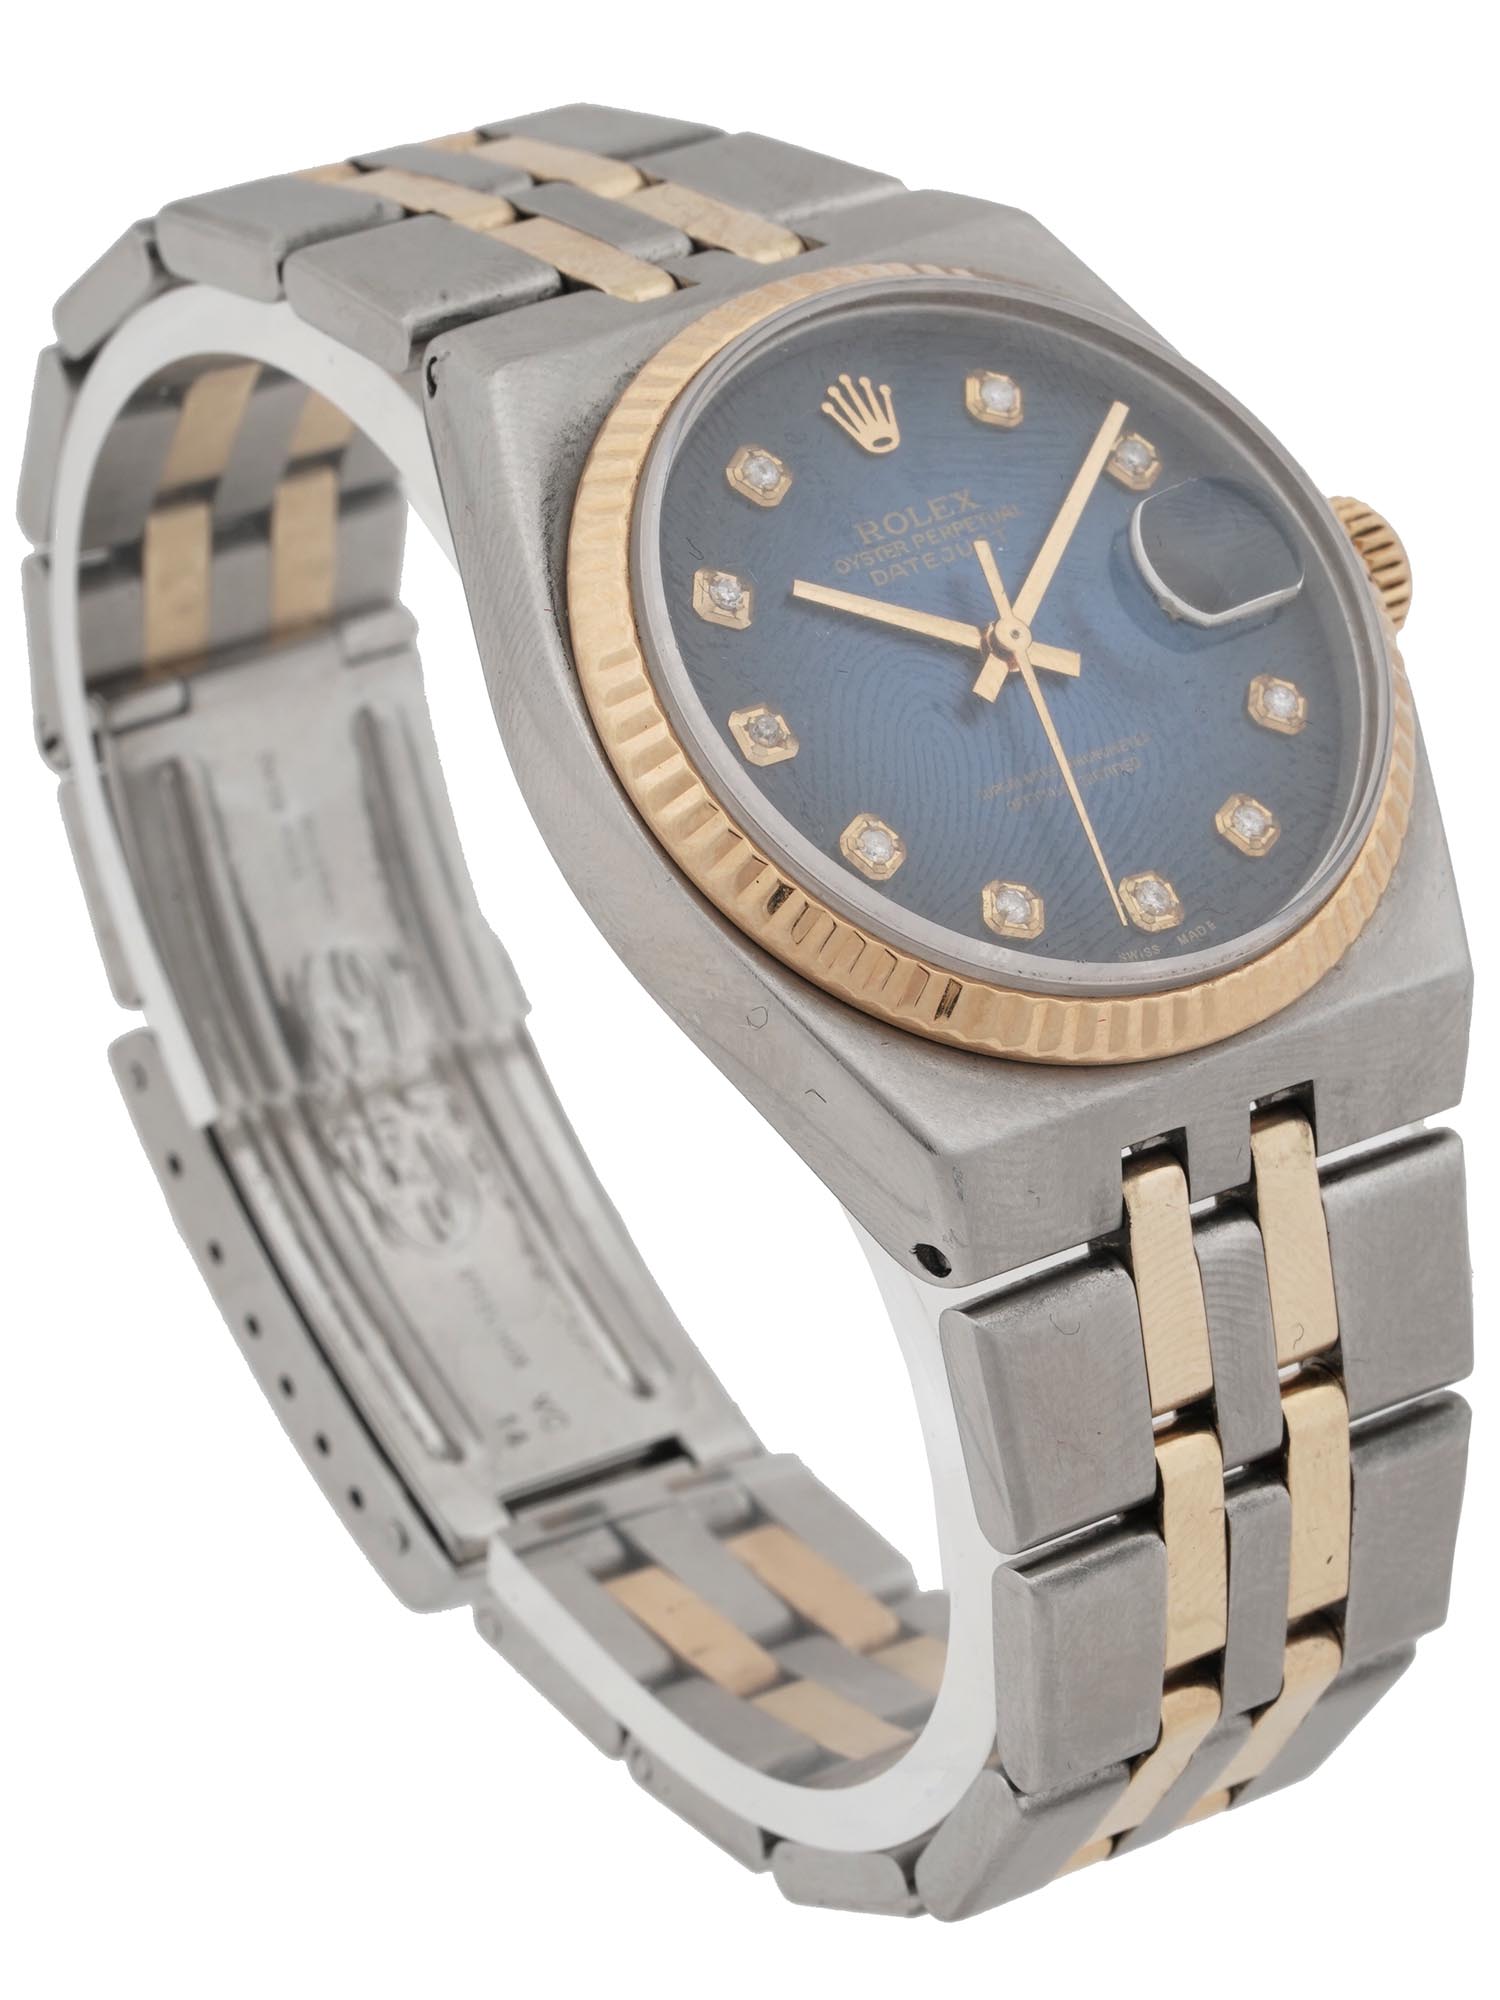 18K GOLD ROLEX OYSTER PERPETUM DATEJUST WATCH PIC-1